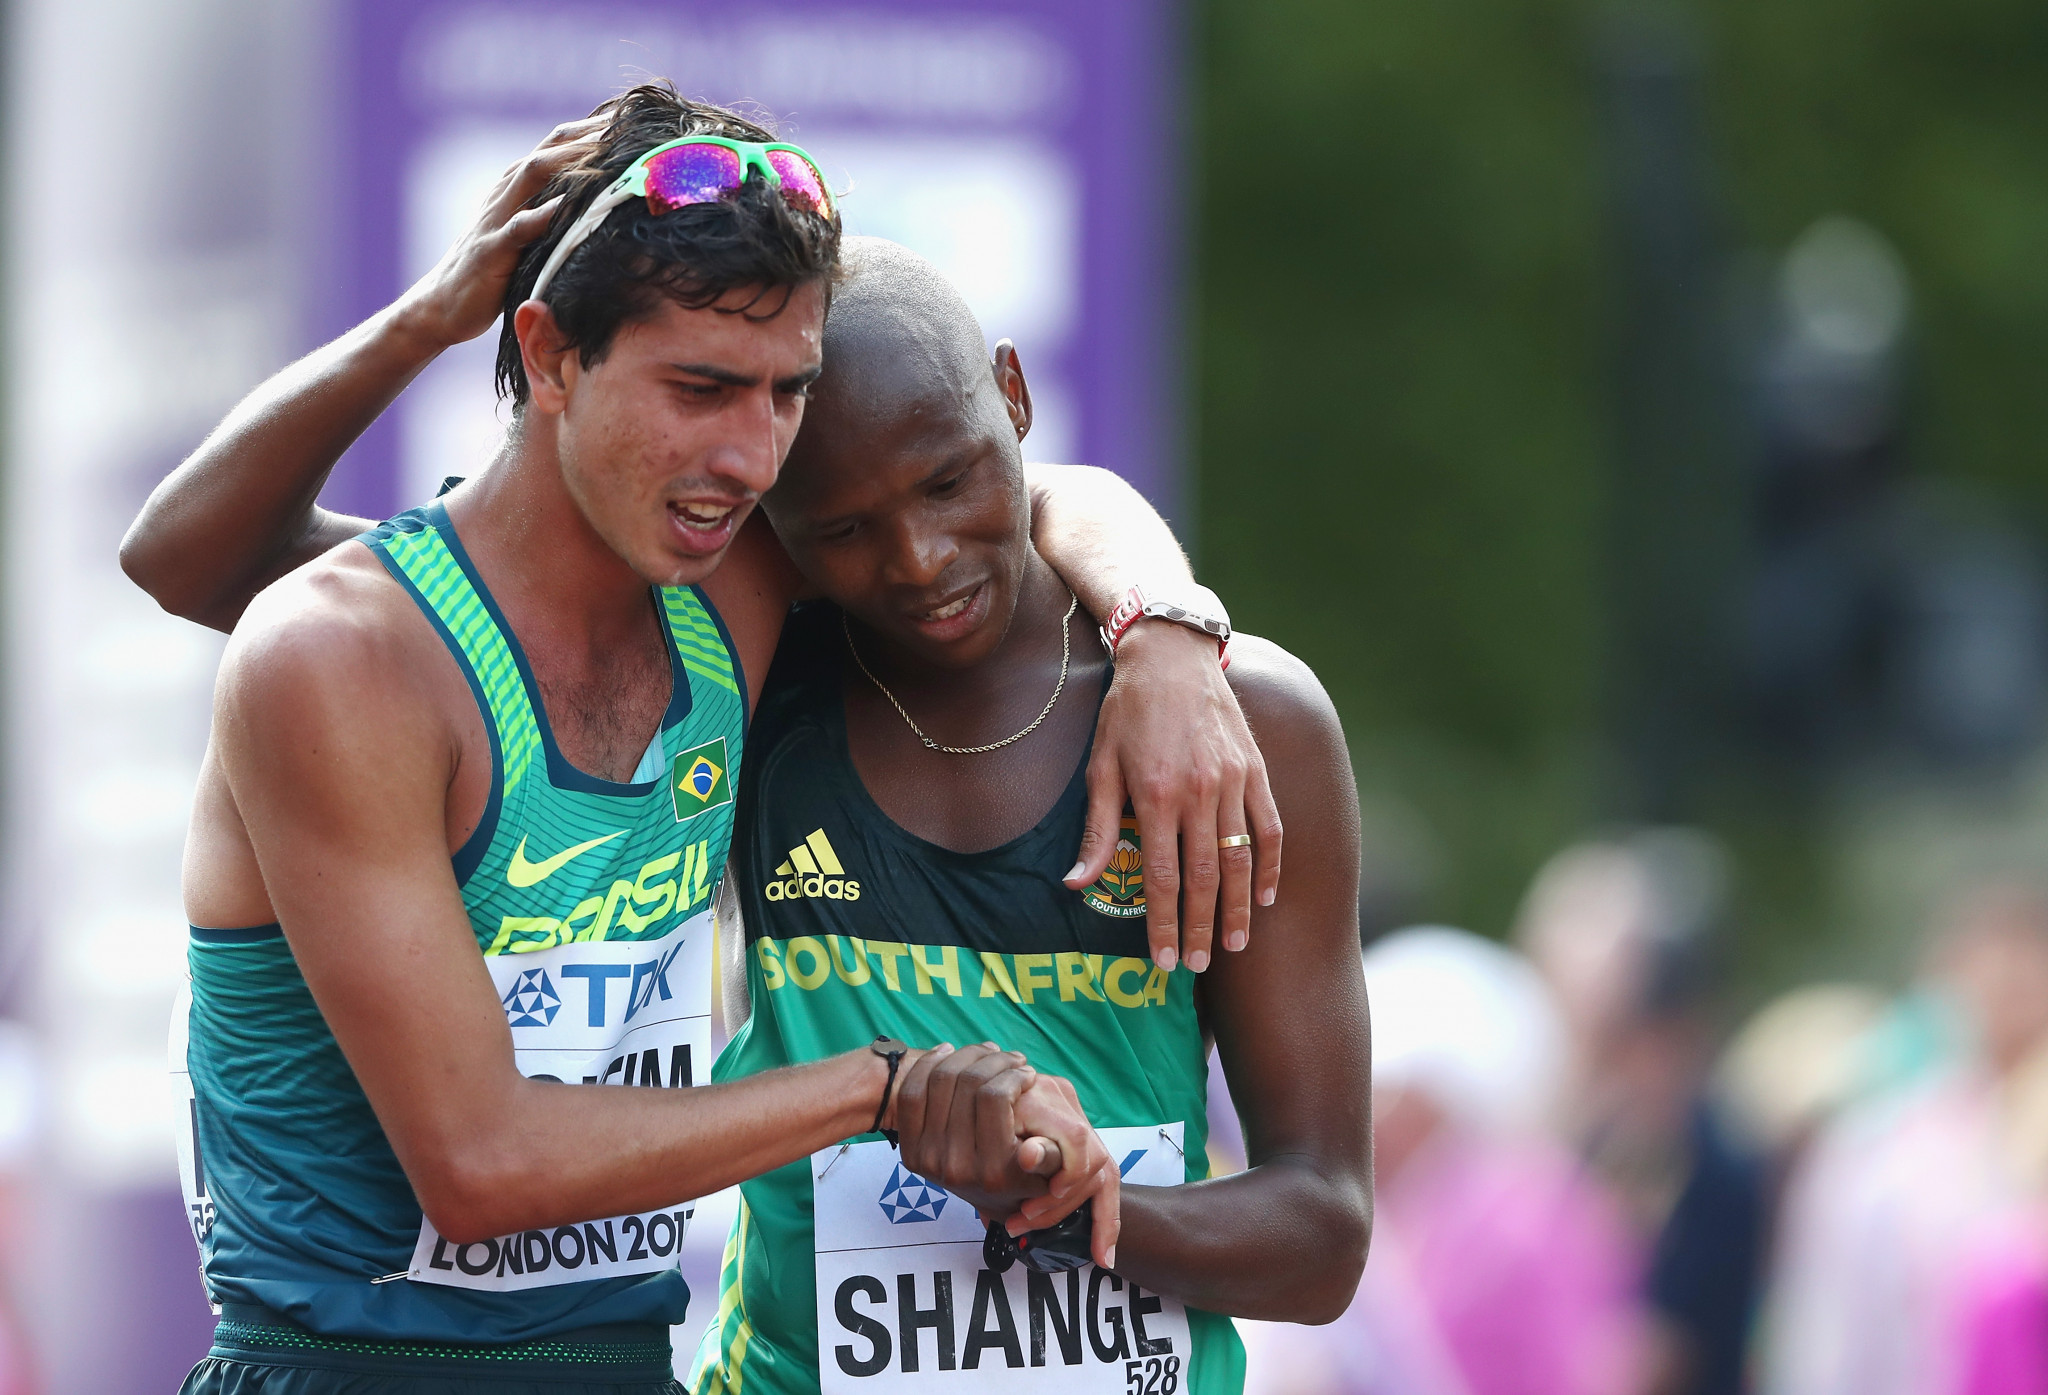 Lebogang Shange, right, broke the South African national record and finished fourth in the 20km race walk at the World Athletics  Championships in 2017 ©Getty Images